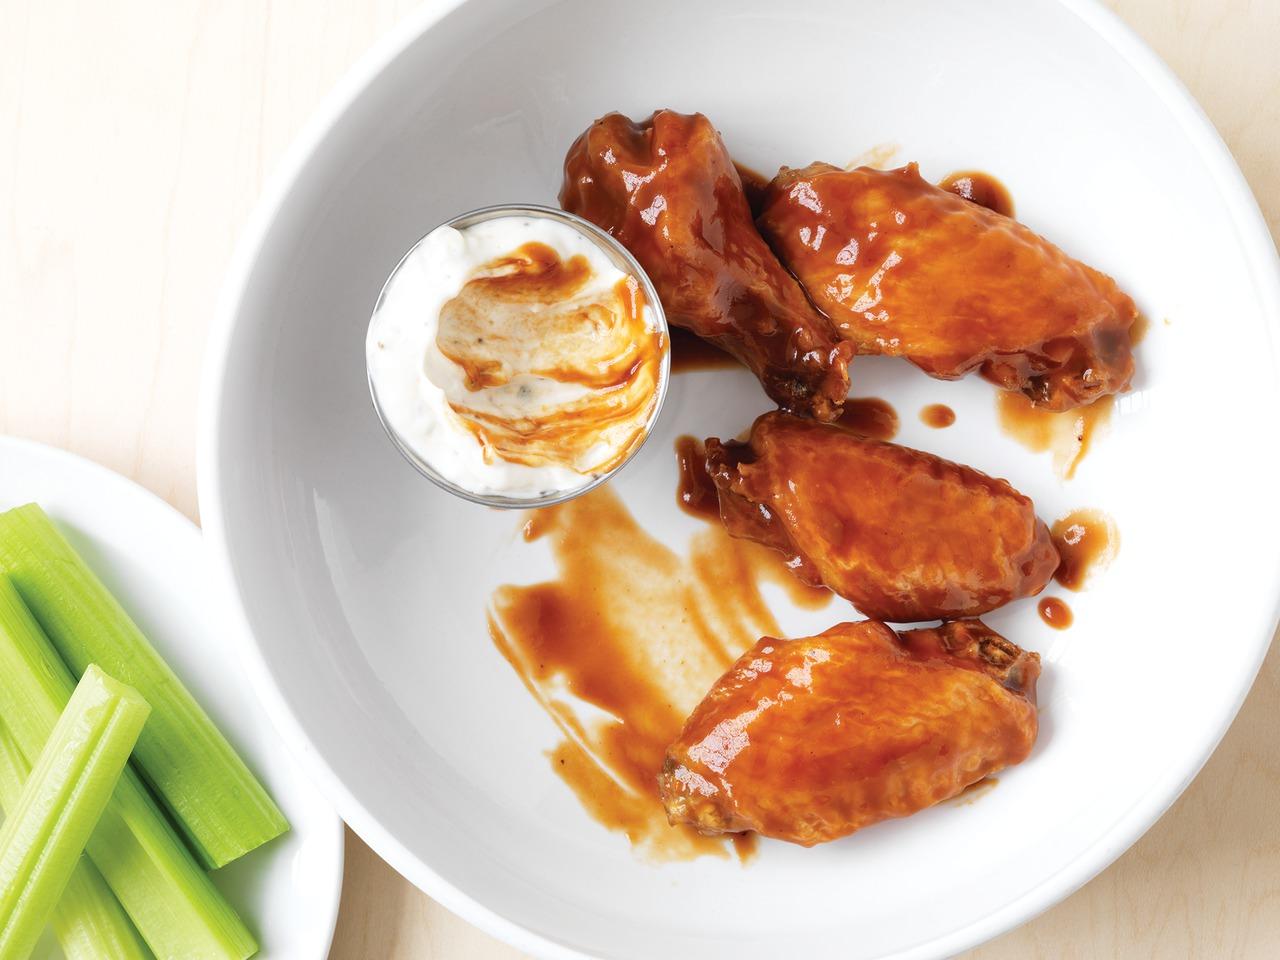 Save money every day of the week at Buffalo Wings & Rings | Time Out Dubai